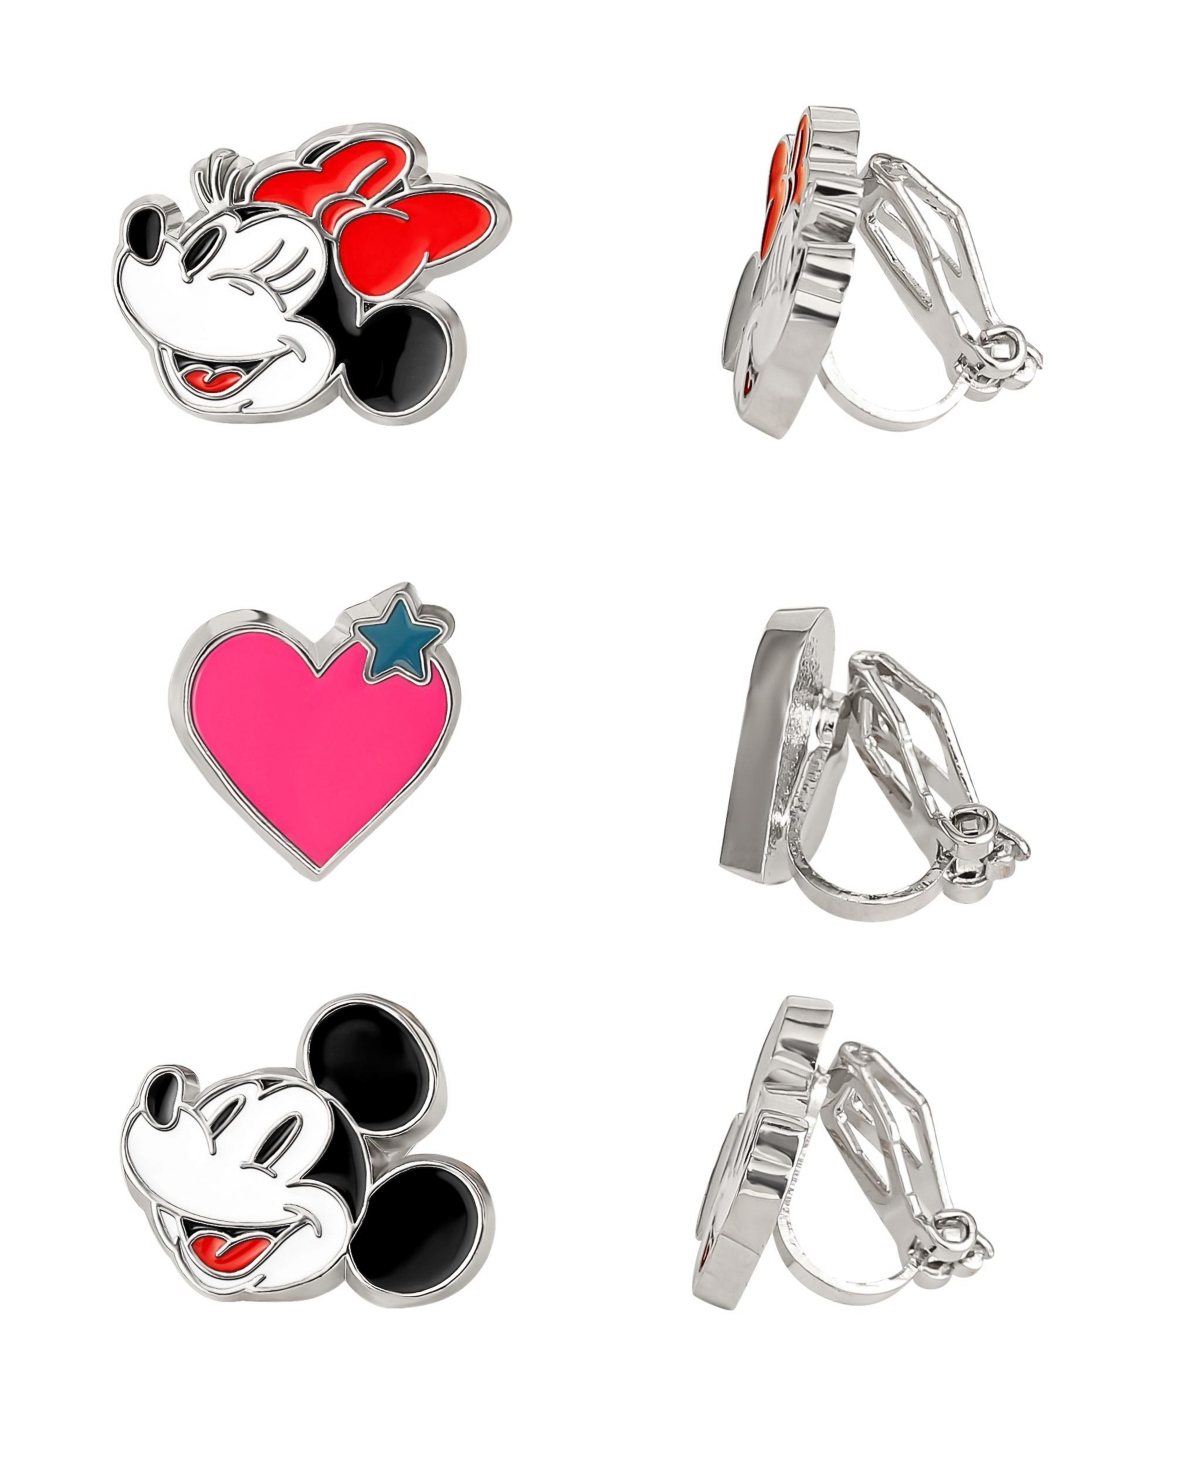 Mickey and Minnie Mouse Fashion Clip On Earrings - Set of 3 - Silver tone, pink, white